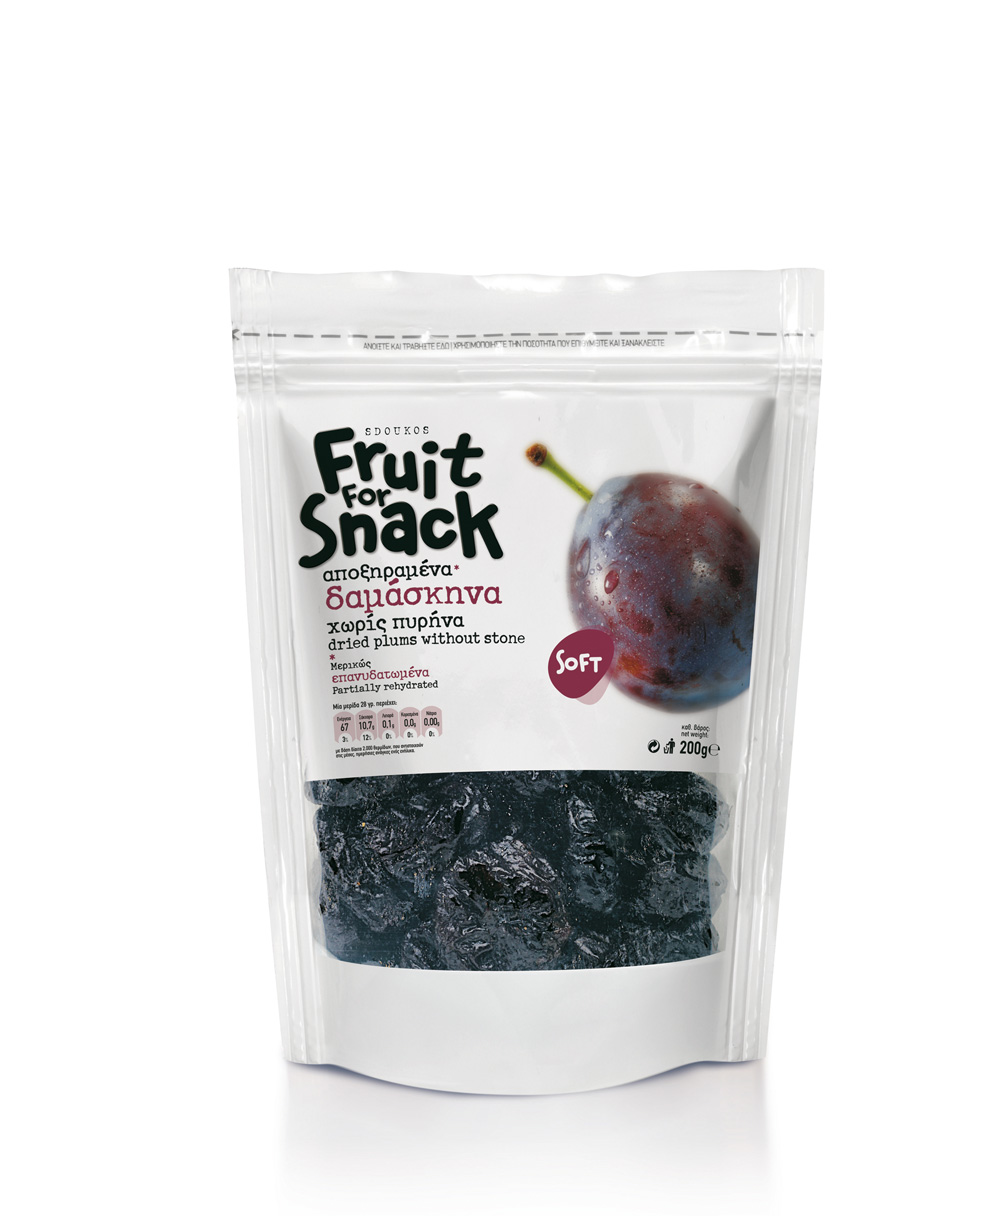 DRIED PLUMS PARTIALLY REHYDRATED “FRUIT FOR SNACK” 200g